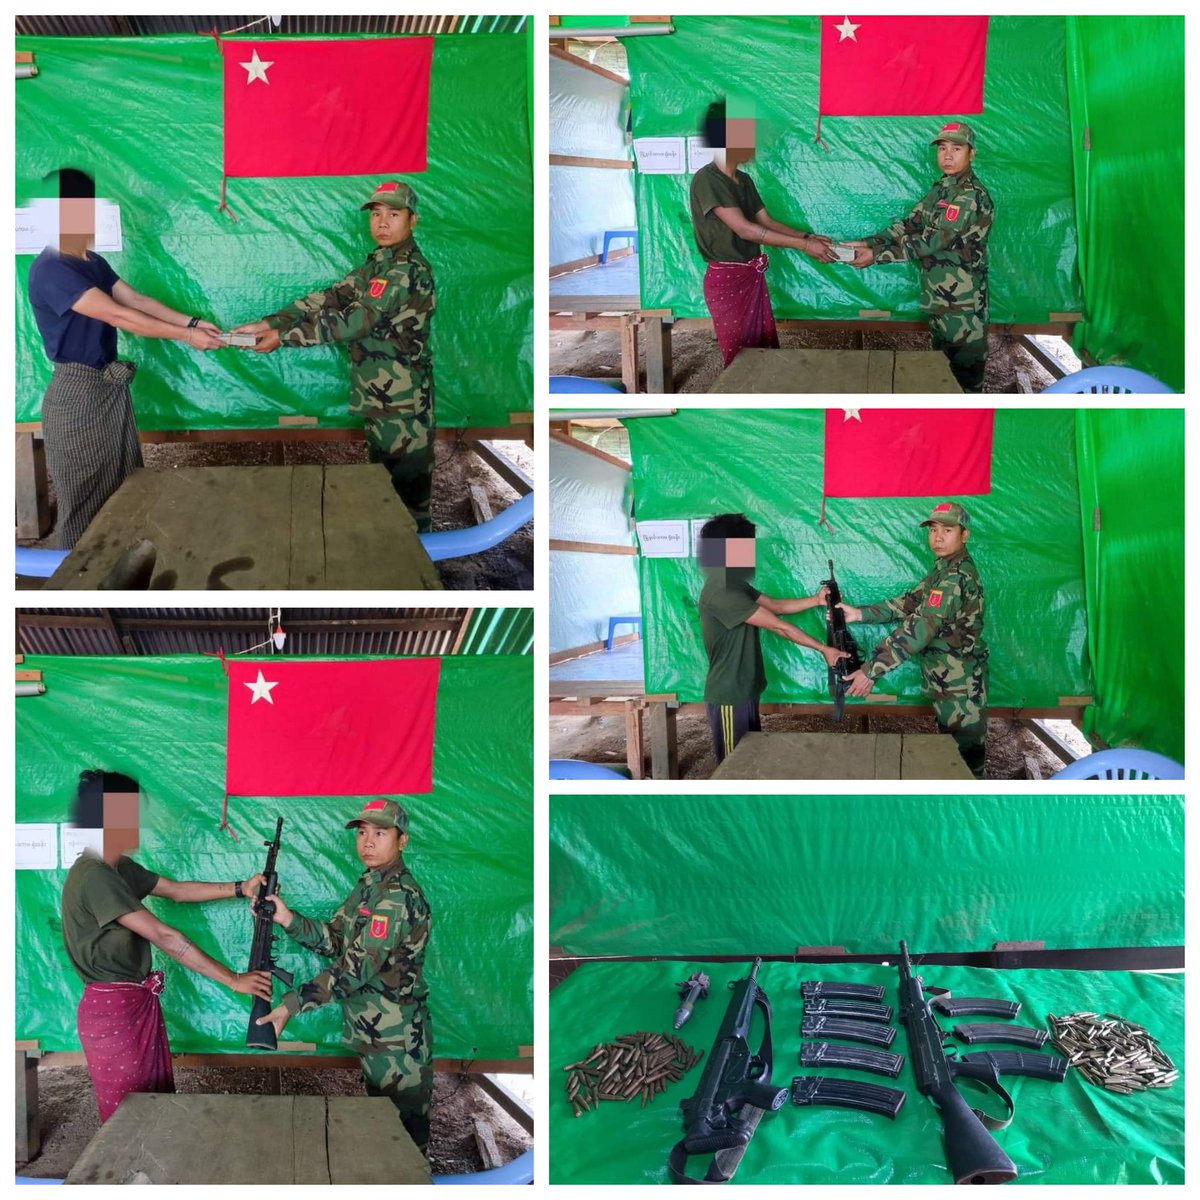 HomeMalin Tsp People's Defense Force reported that 5 soldiers from the Shanni Militia Force under the Terrorist Military Council defected with weapons and so they were awarded with money.
@UN @ASEAN @EUCouncil
@POTUS
#BanJetFuelExportsToMM
#2024Apr30Coup
#WhatsHappeningInMyanmar